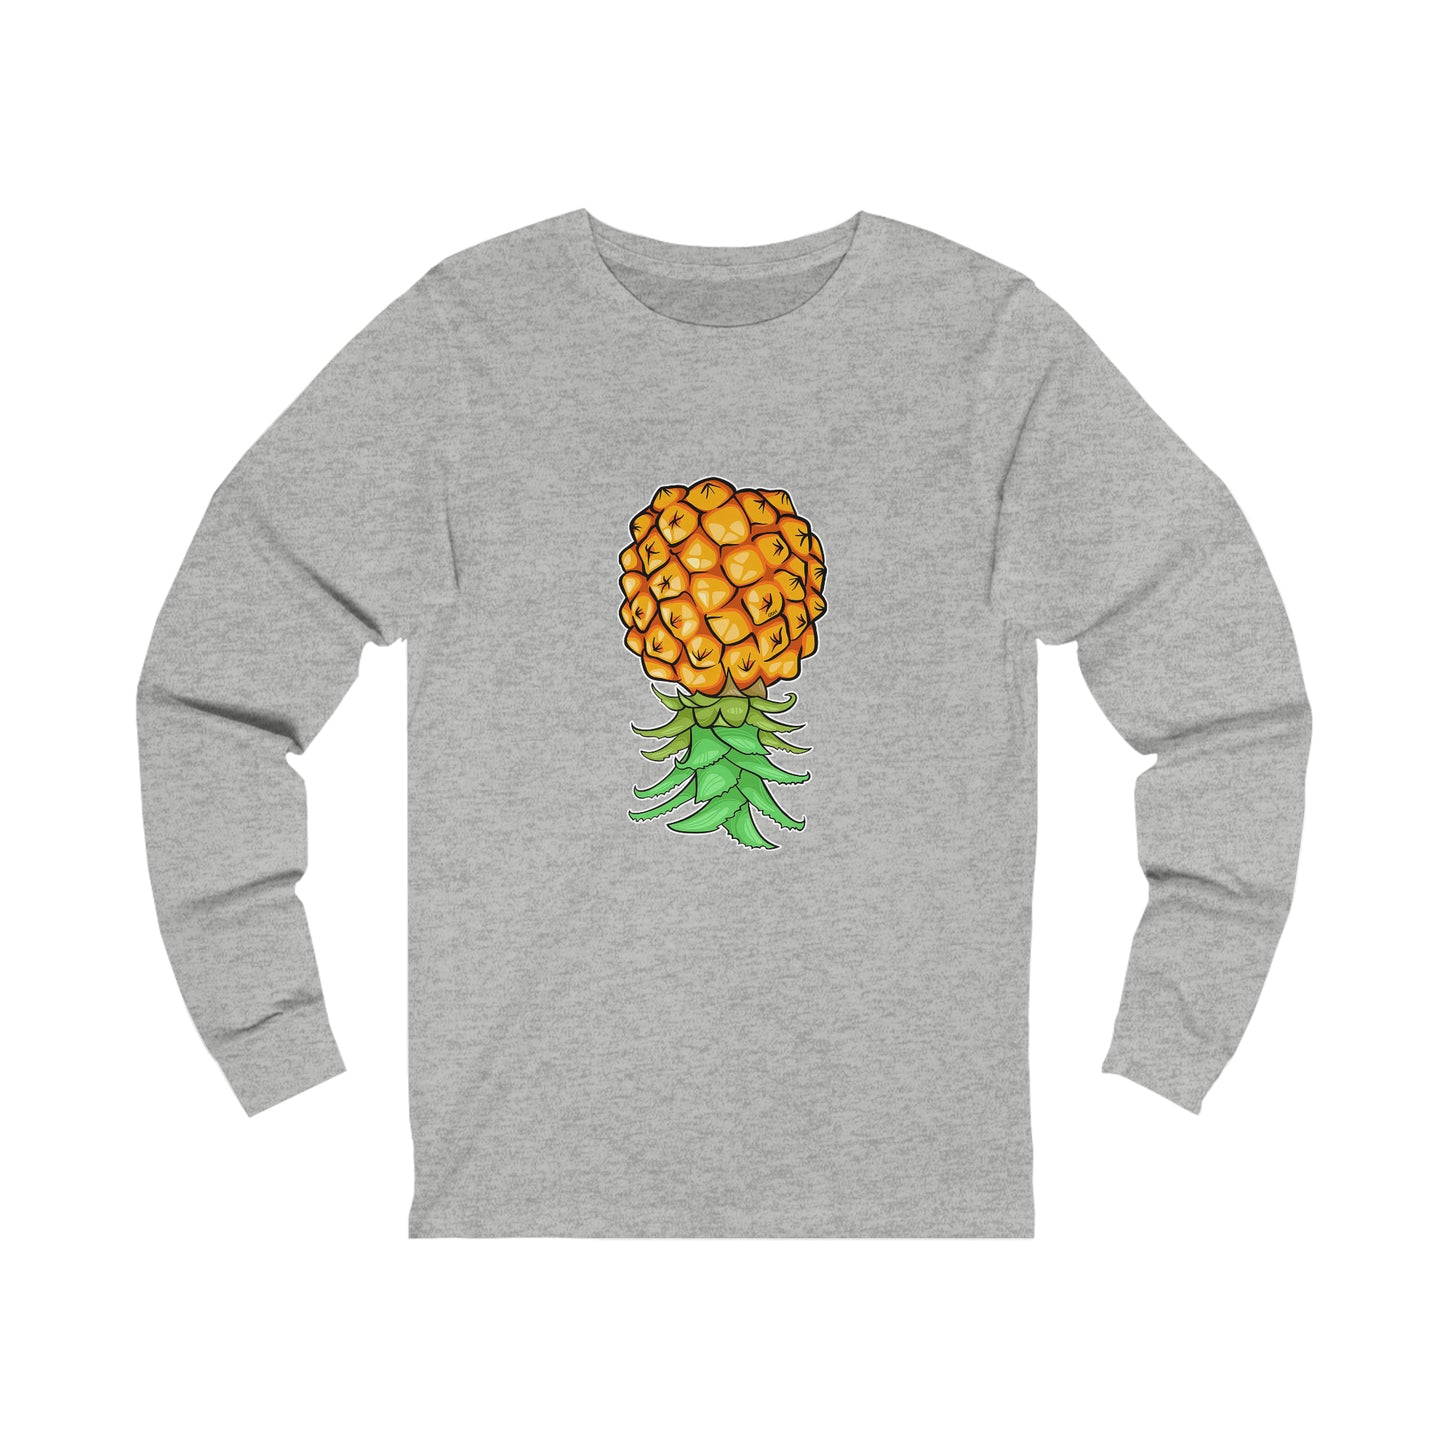 Upside Down Pineapple Unisex Jersey Long Sleeve Tee If You Know You Know